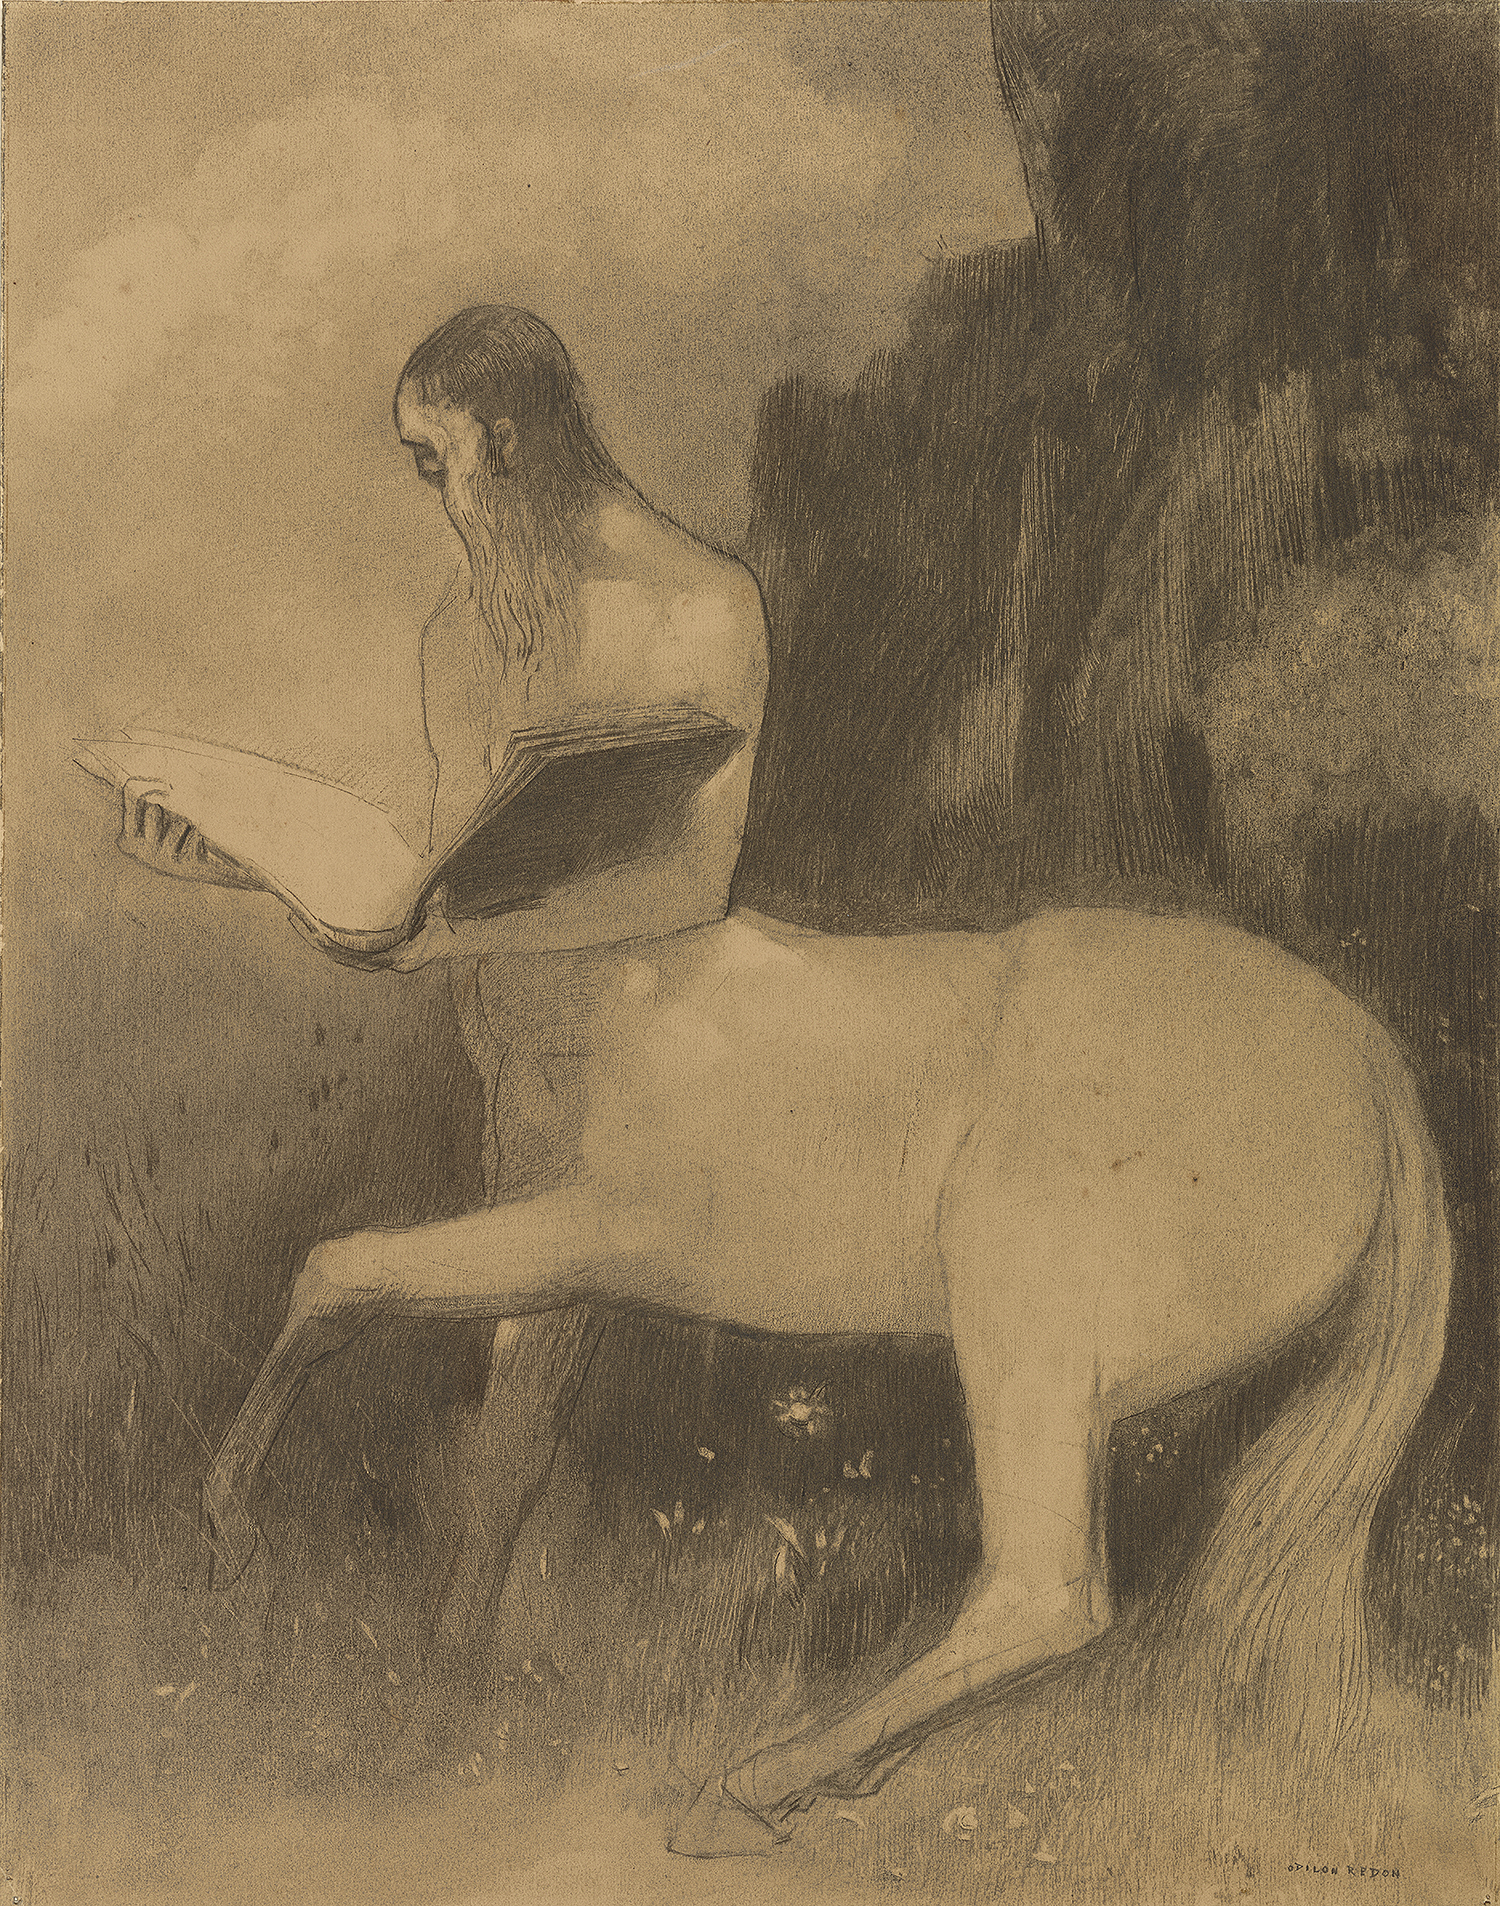 Redon, Odilon, 1840-1916, Centaure lisant [drawing], 19th century, recto, Thaw Collection (EVT 243)